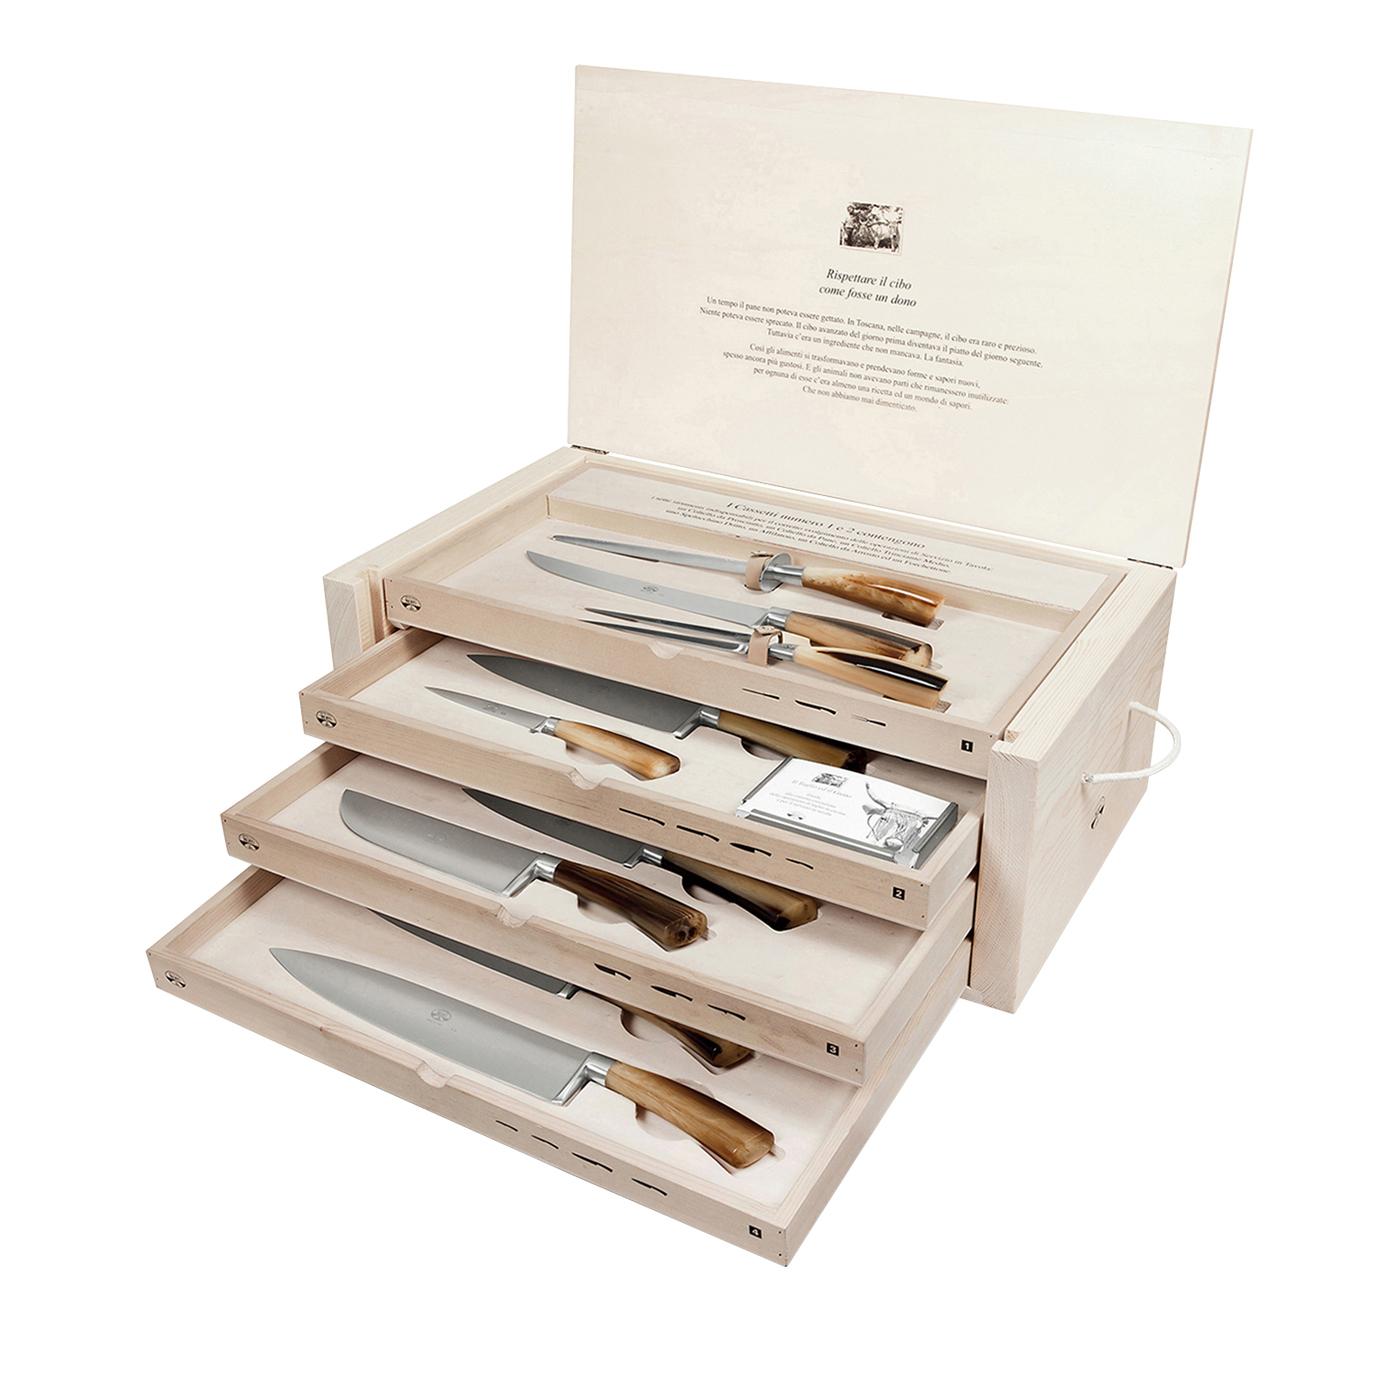 This magnificent set is a precious gift to a food-lover's kitchen. It is comprised of 14 handmade, exquisite knives of which 7 are used in the kitchen (fish knife, pesto knife, vegetable knife, bone knife, curved spelucchino knife, chef knife,